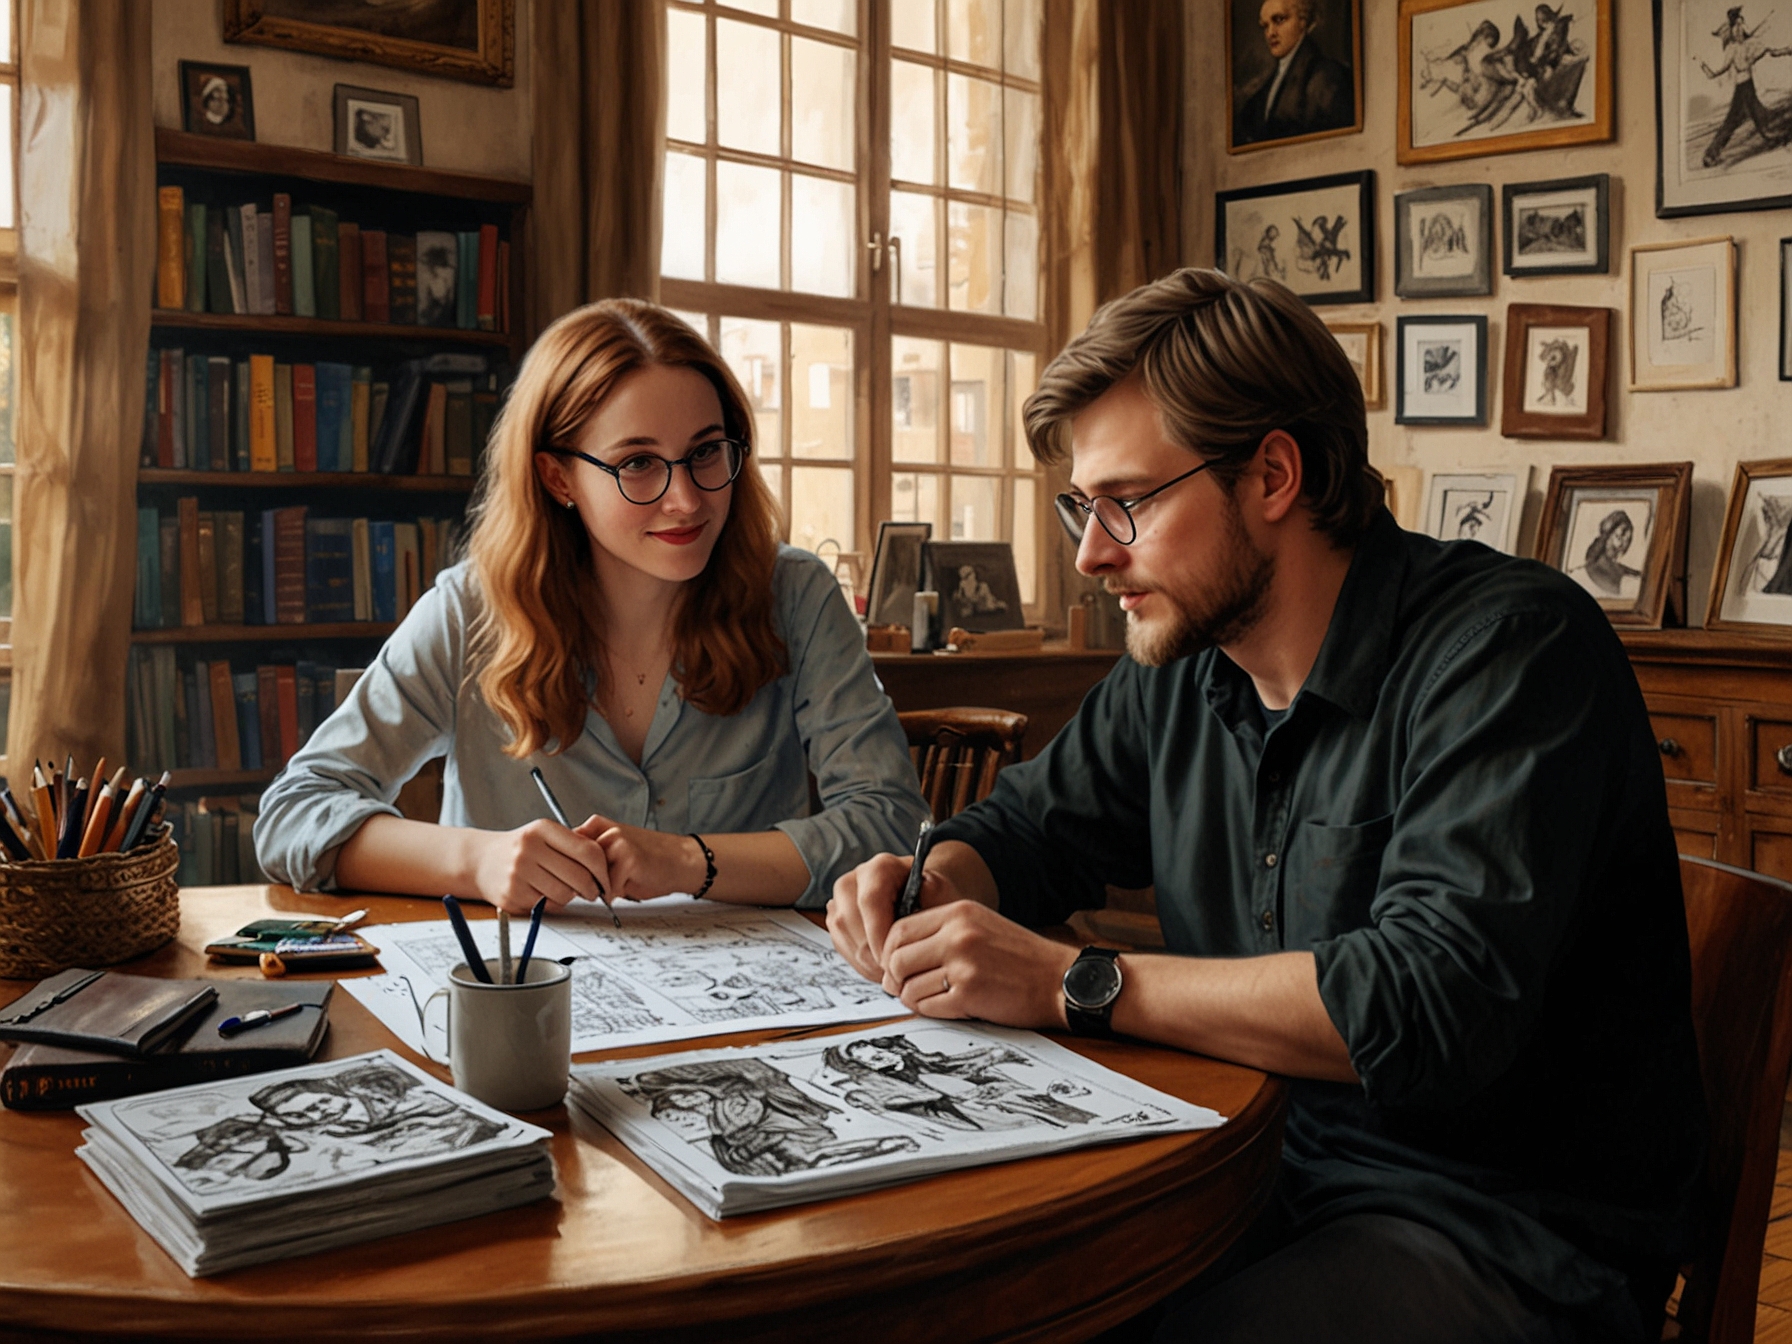 Francesca Gardiner and Mark Mylod, sitting together in a creative meeting, discuss plans for the upcoming Harry Potter TV series adaptation. Papers and sketches of Hogwarts are spread out on the table.